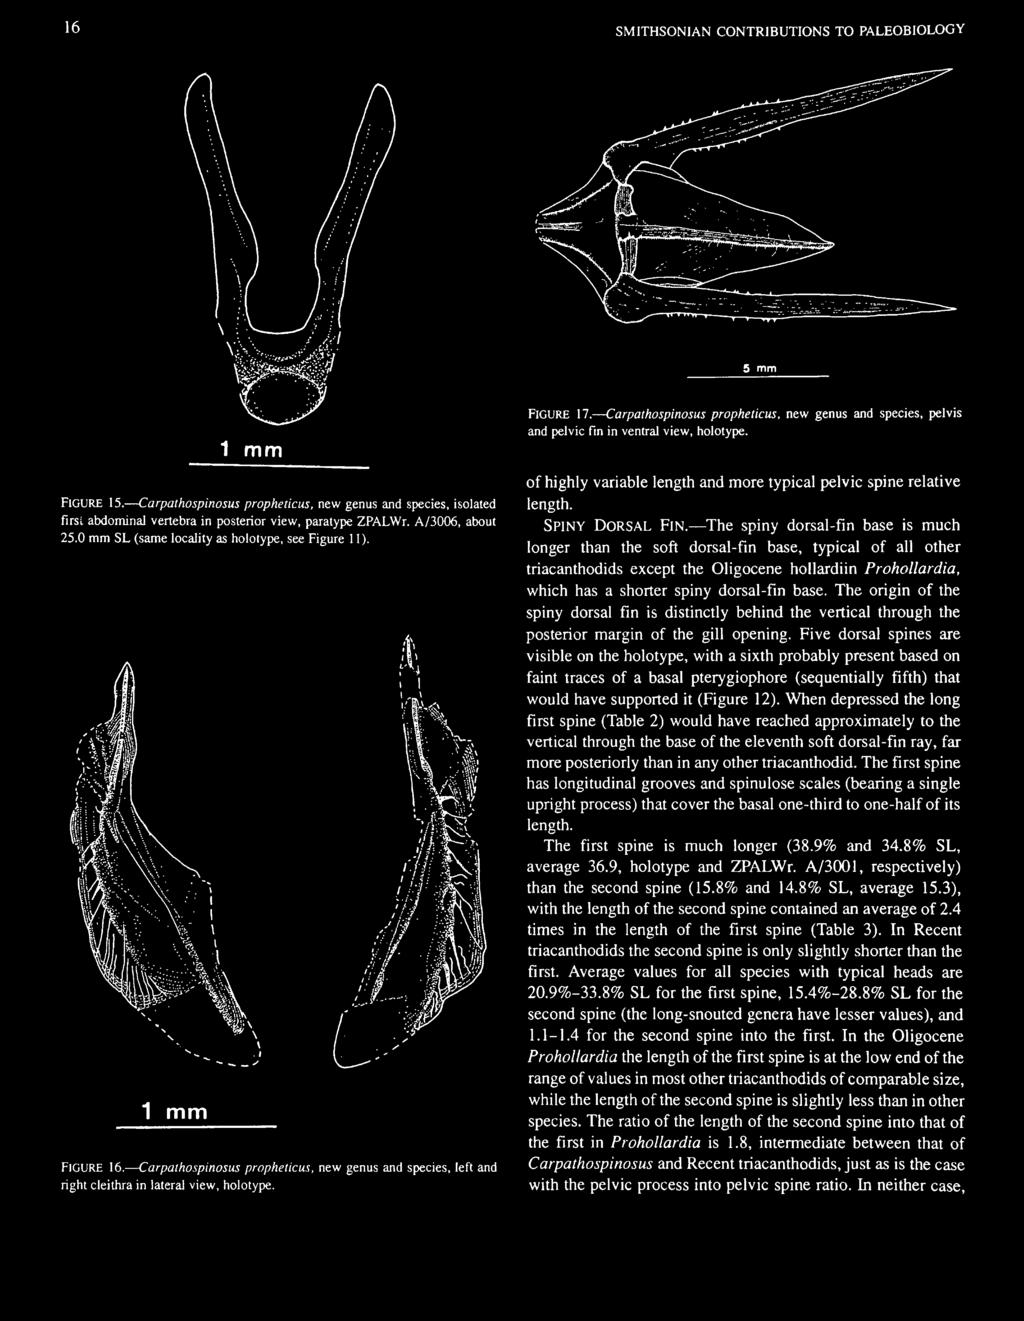 Carpathospinosus propheticus, new genus and species, pelvis and pelvic fin in ventral view, holotype. of highly variable length and more typical pelvic spine relative length. SPINY DORSAL FIN.